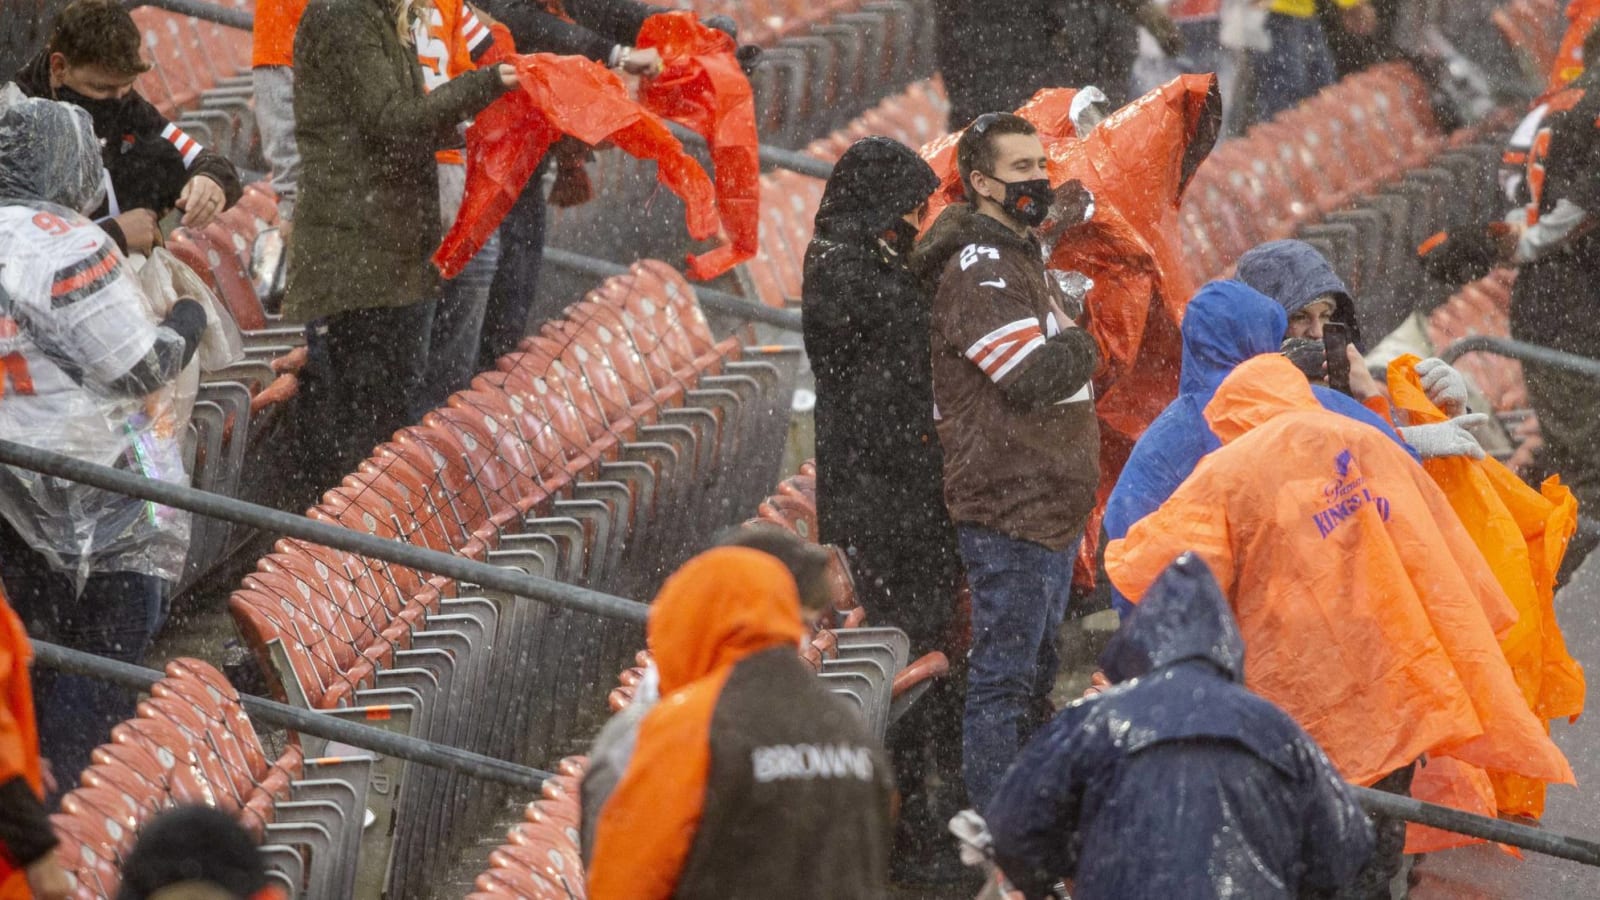 Browns-Texans delayed due to high winds, hail in Cleveland